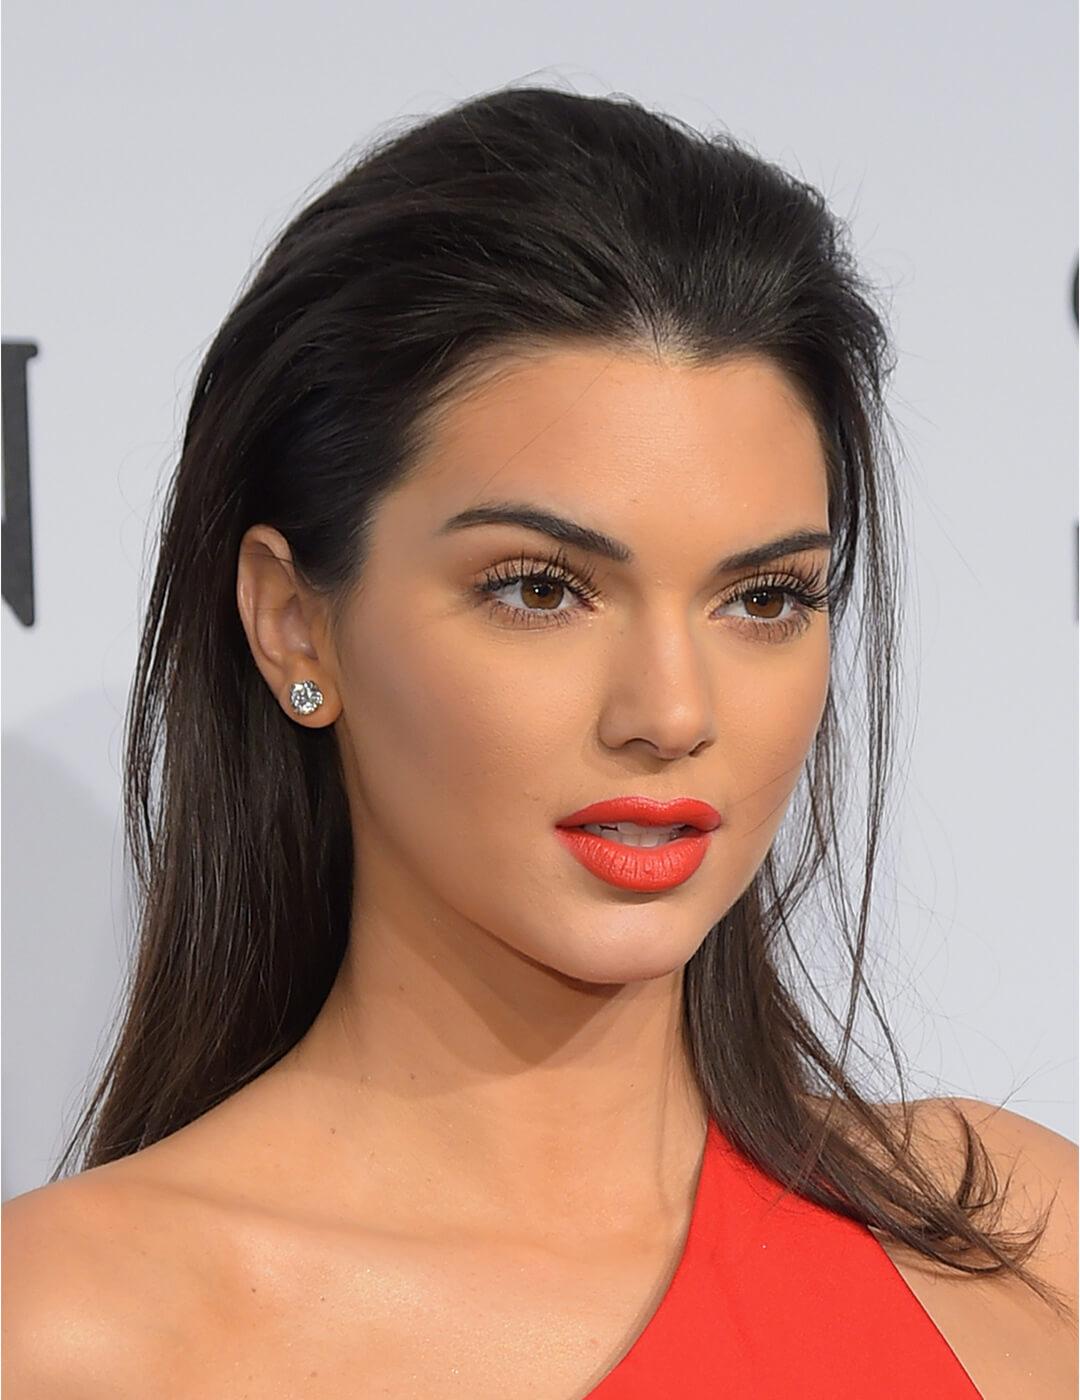 Close-up of Kendall Jenner rocking a neutral eye makeup paired with bright coral lipstick and a slicked back hairstyle